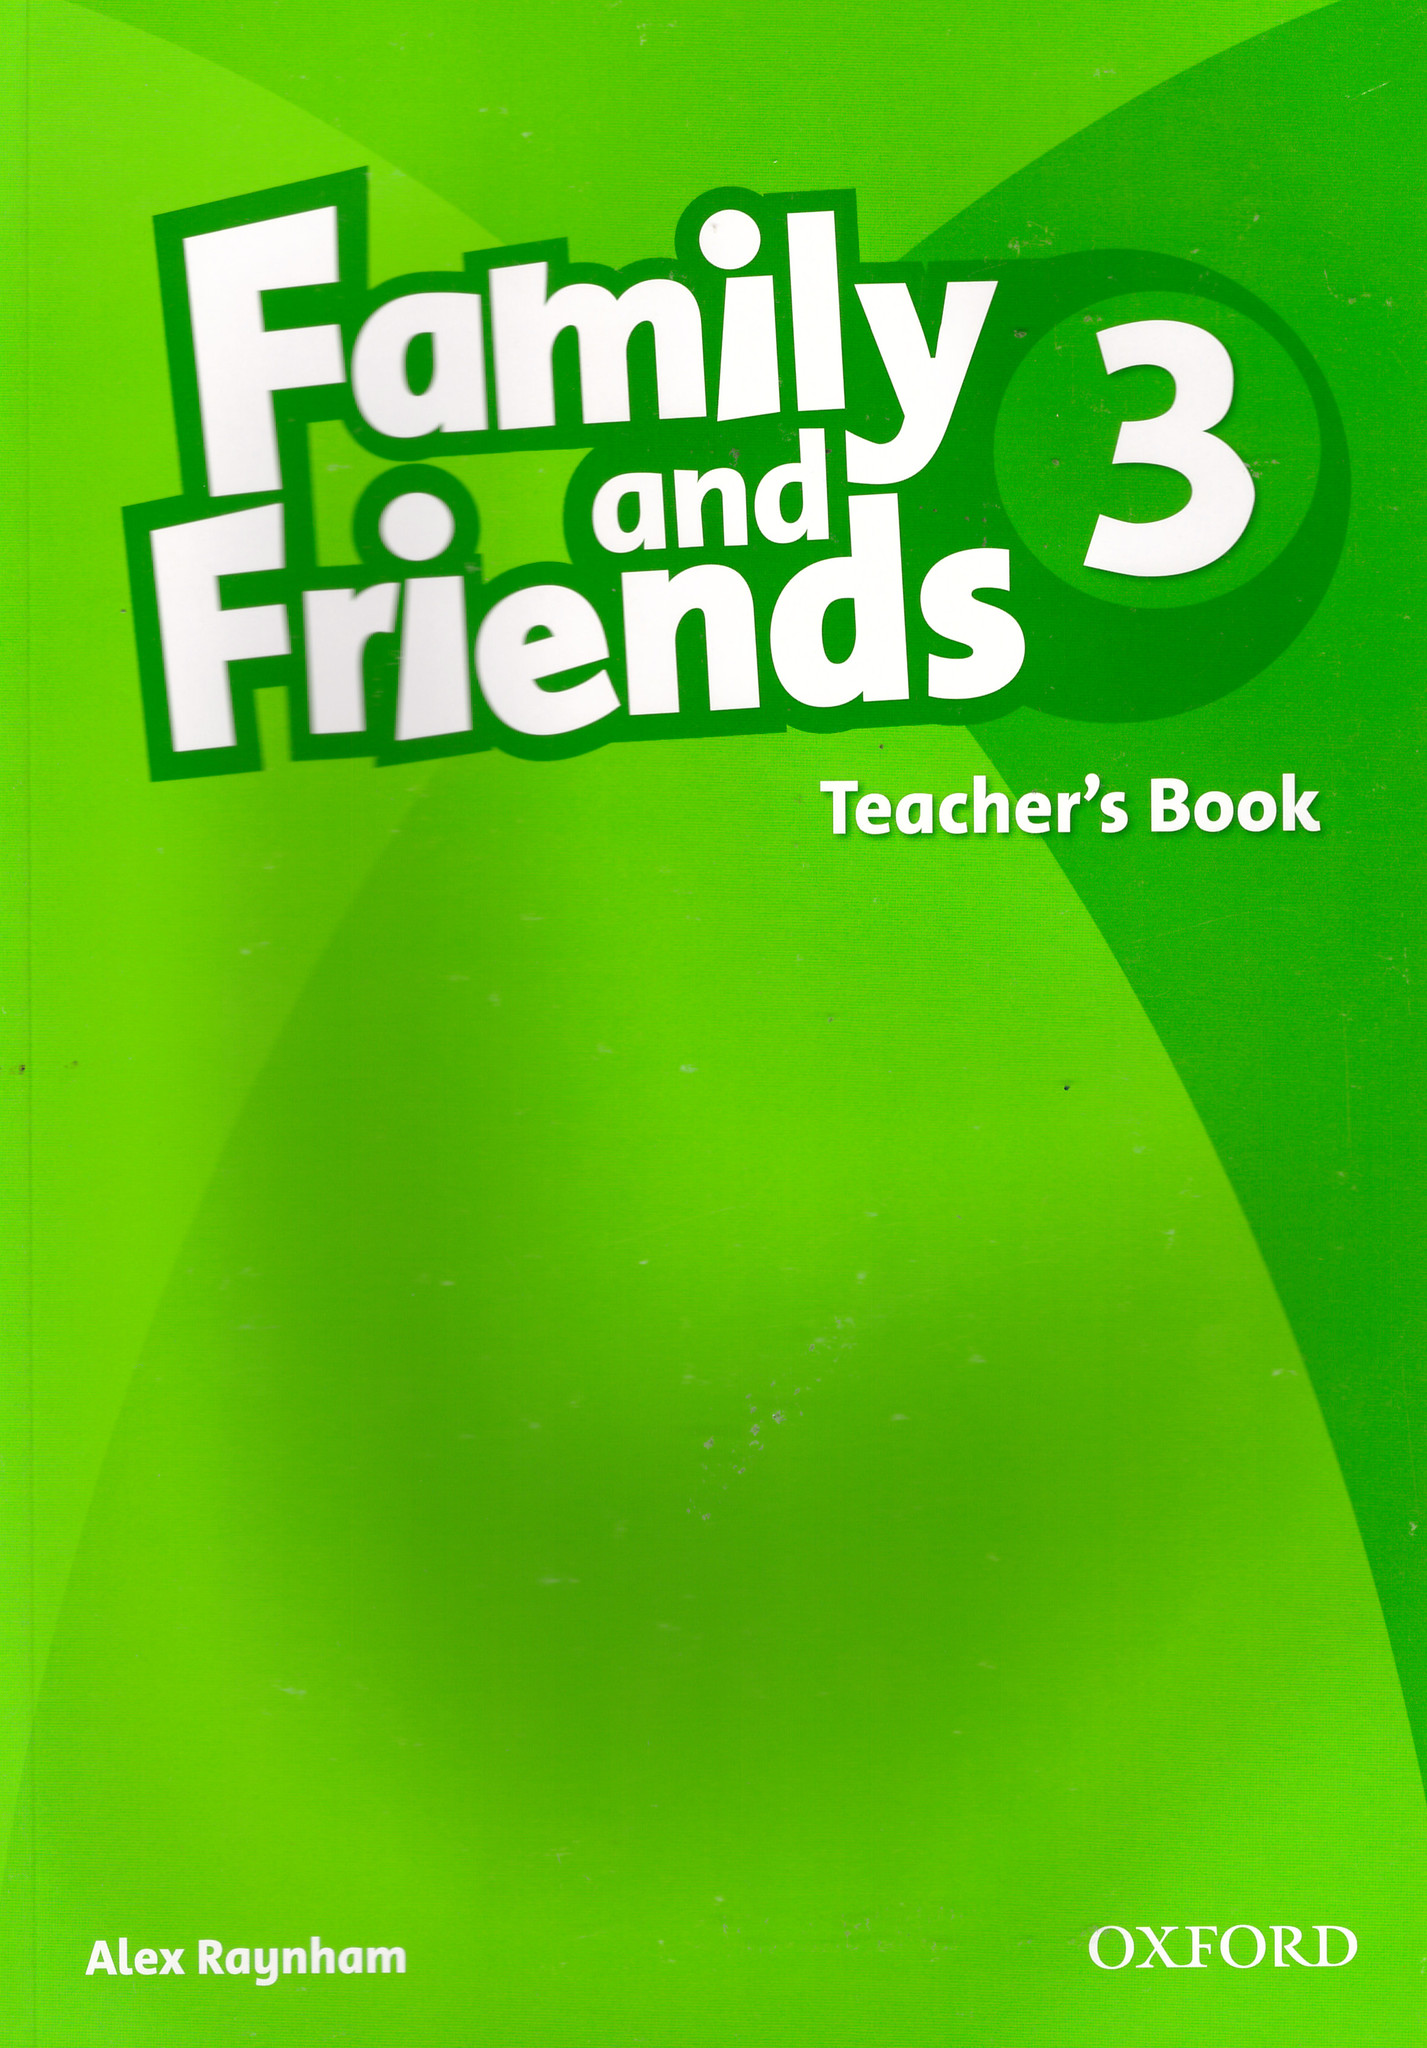 Friends 3 test book. Family and friends teacher's book. Фэмили энд френдс. Family and friends teacher's book ⁃ для учителей. Family and friends 3 teachers book обложка.